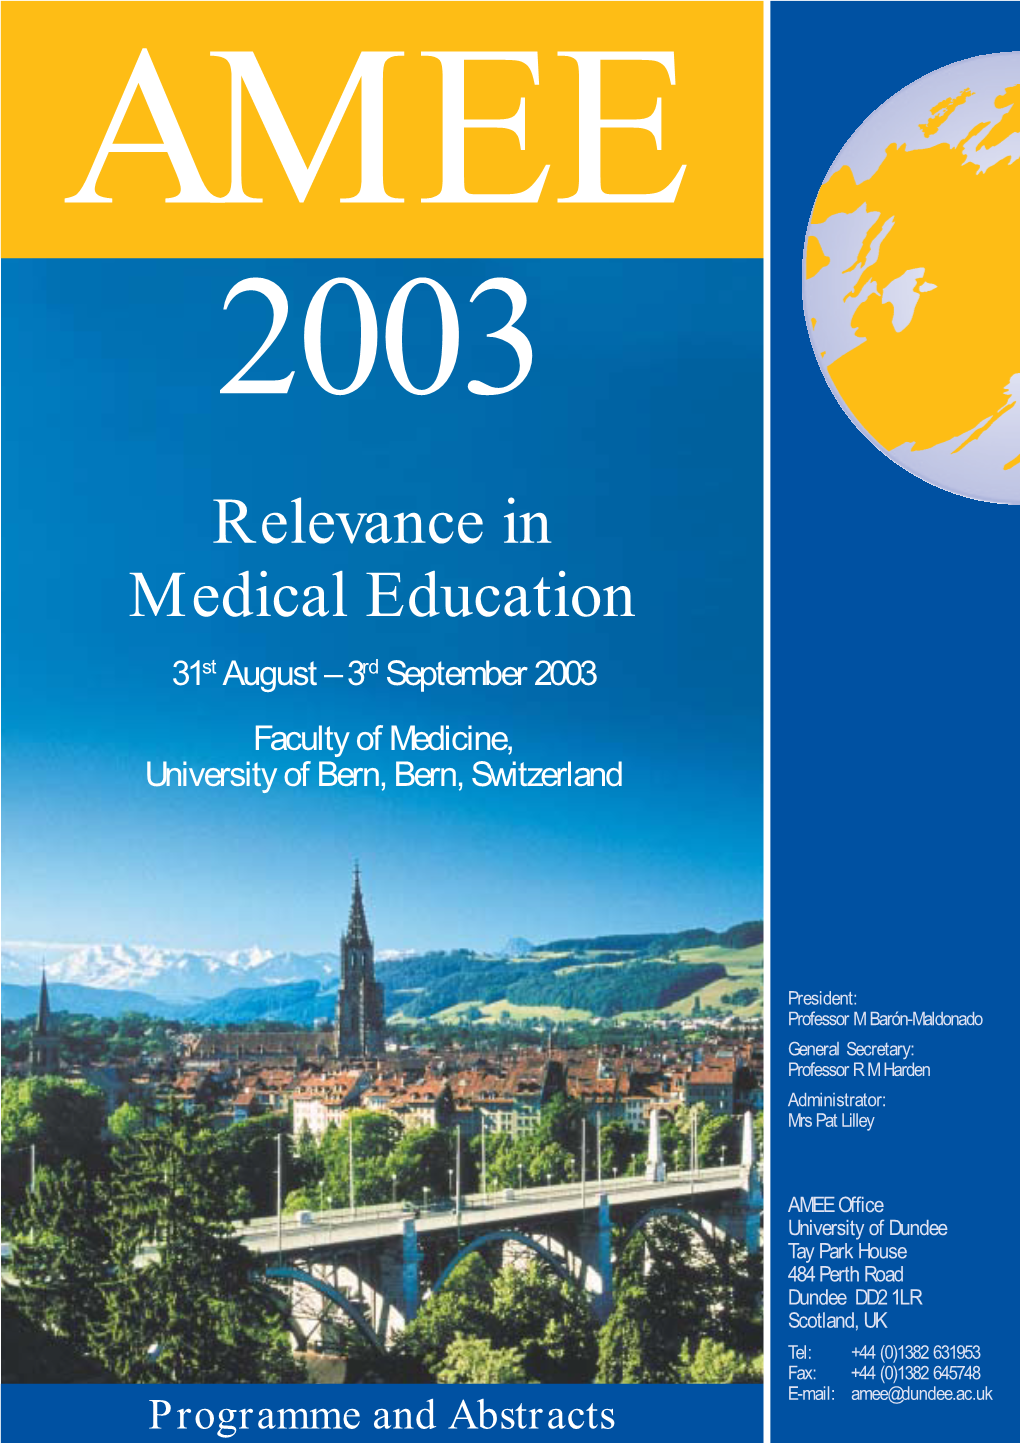 AMEE 2003 Programme and Abstracts